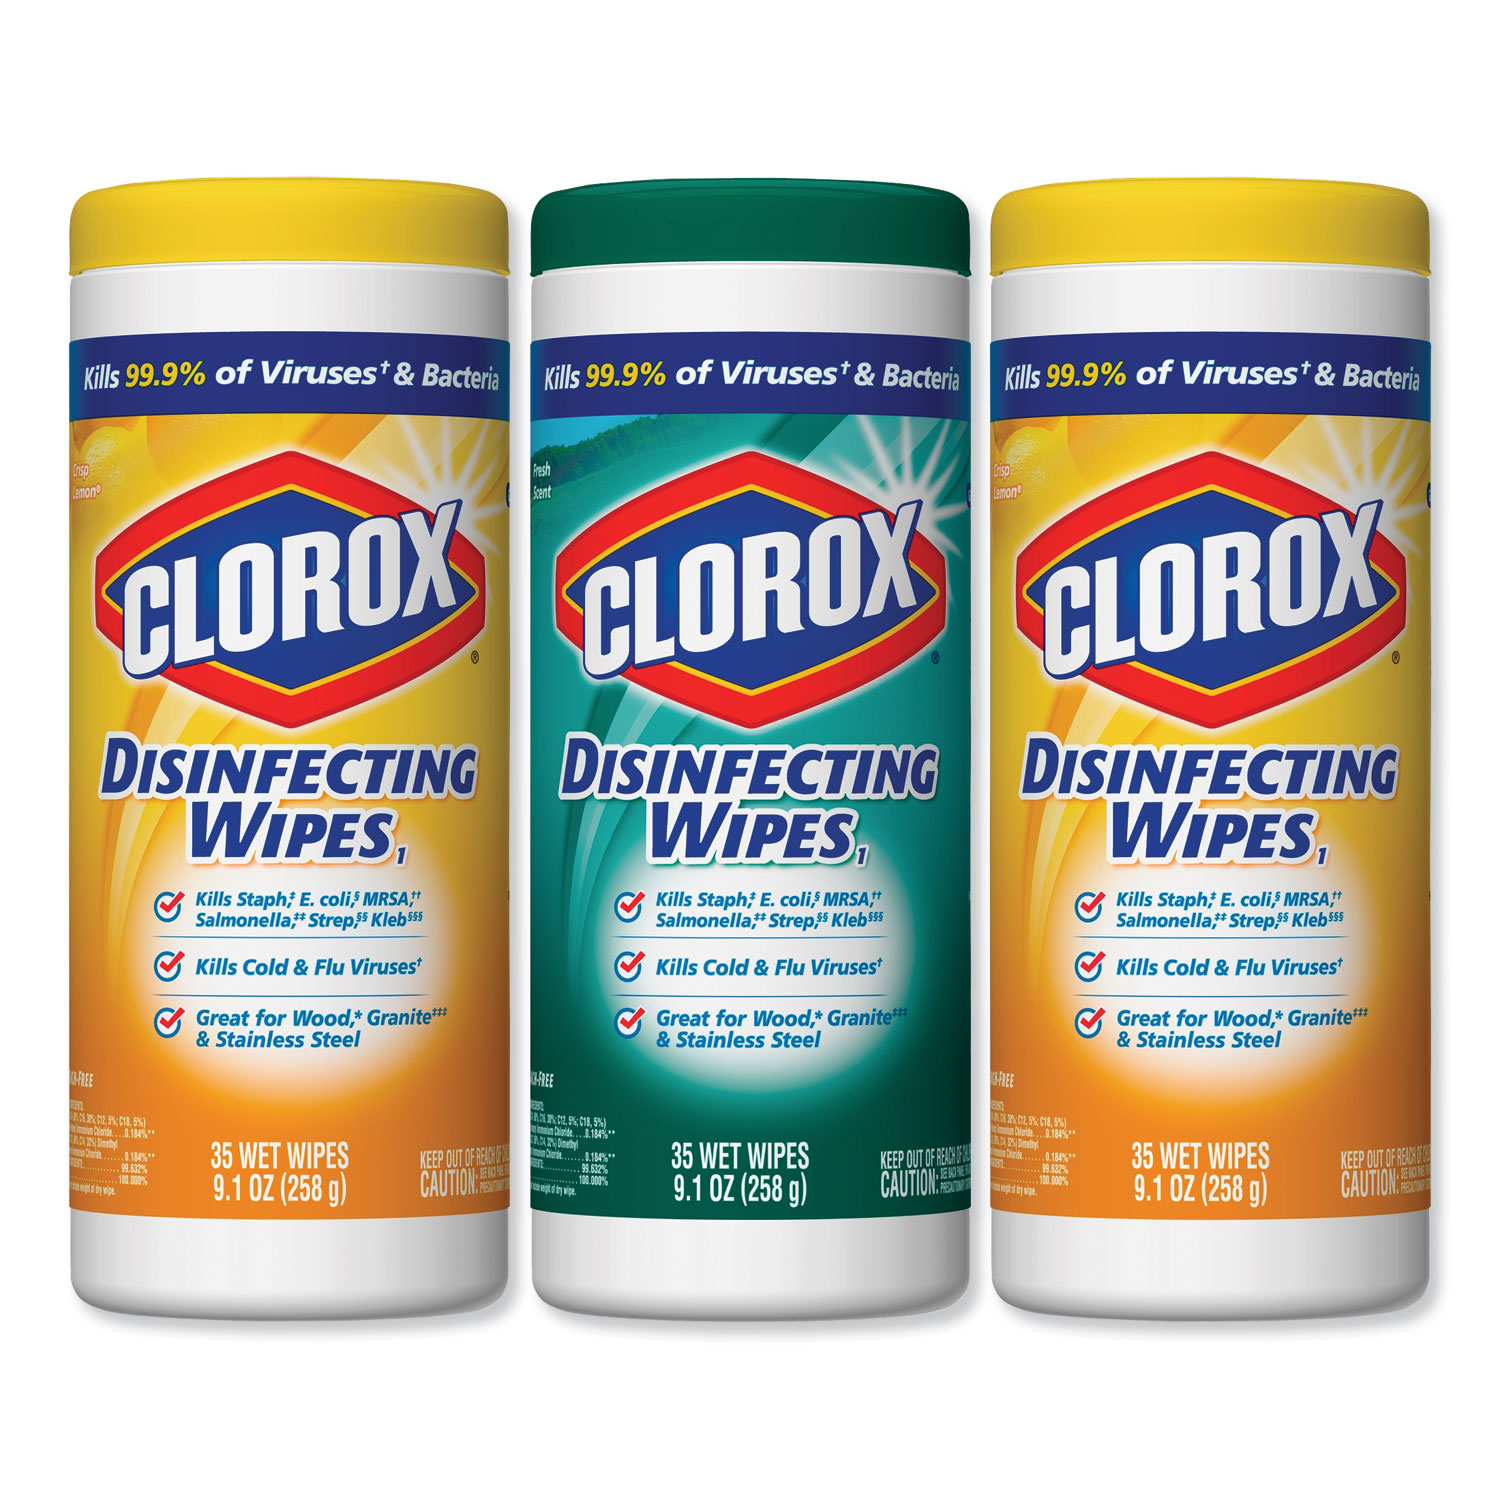  Clorox 30112 Disinfecting Wipes, 7 x 8, Fresh Scent/Citrus Blend, 35/Canister, 3/Pack (CLO30112) 